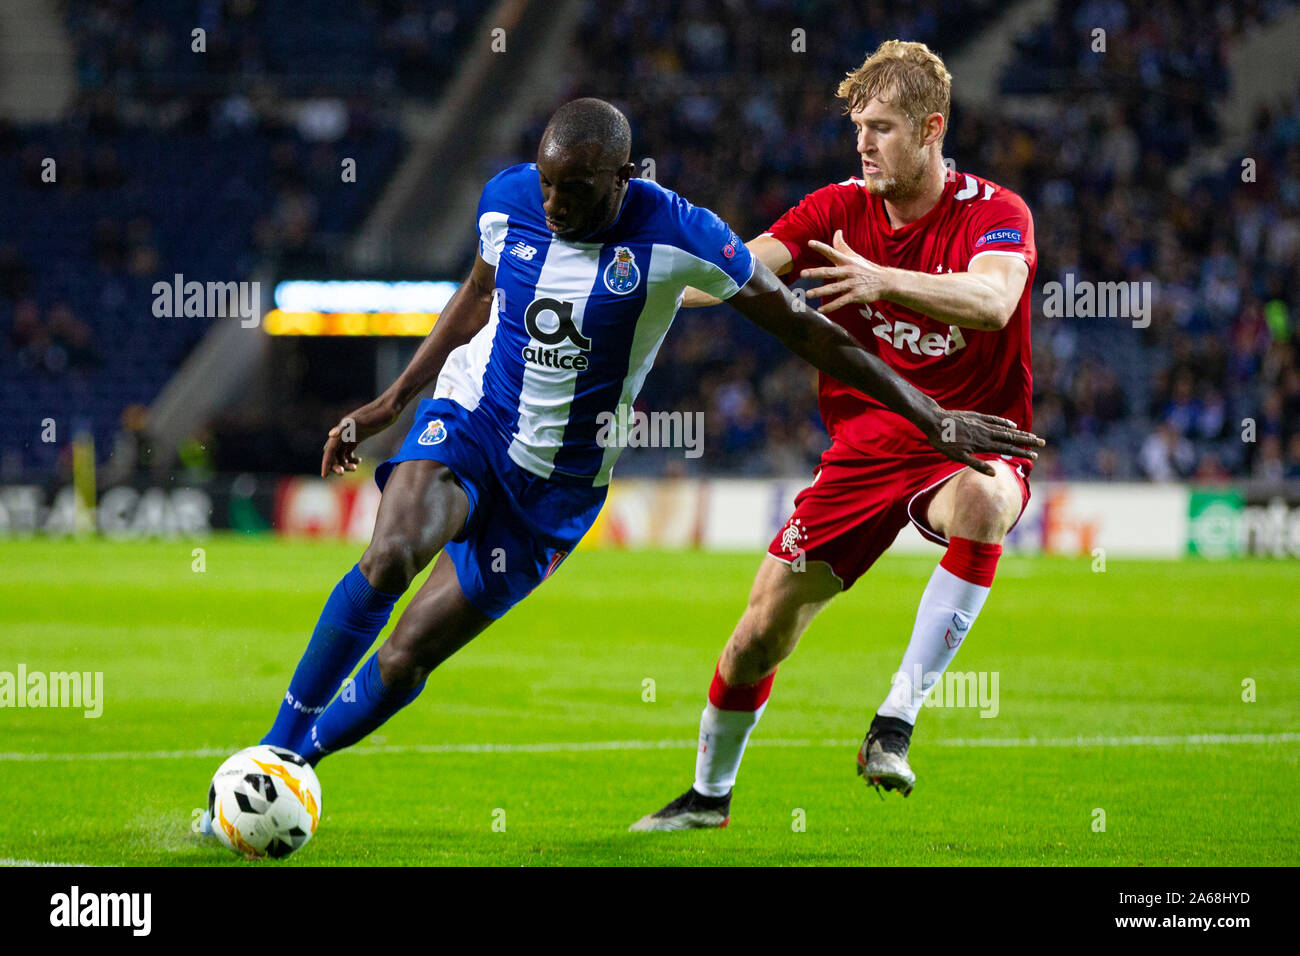 FC Porto's player, Moussa Marega (L) and Ranger's player, Filip Helander (R) are seen in action during the UEFA Europa League match at Dragon Stadium. (Final score: FC Porto 1:1 Rangers) Stock Photo